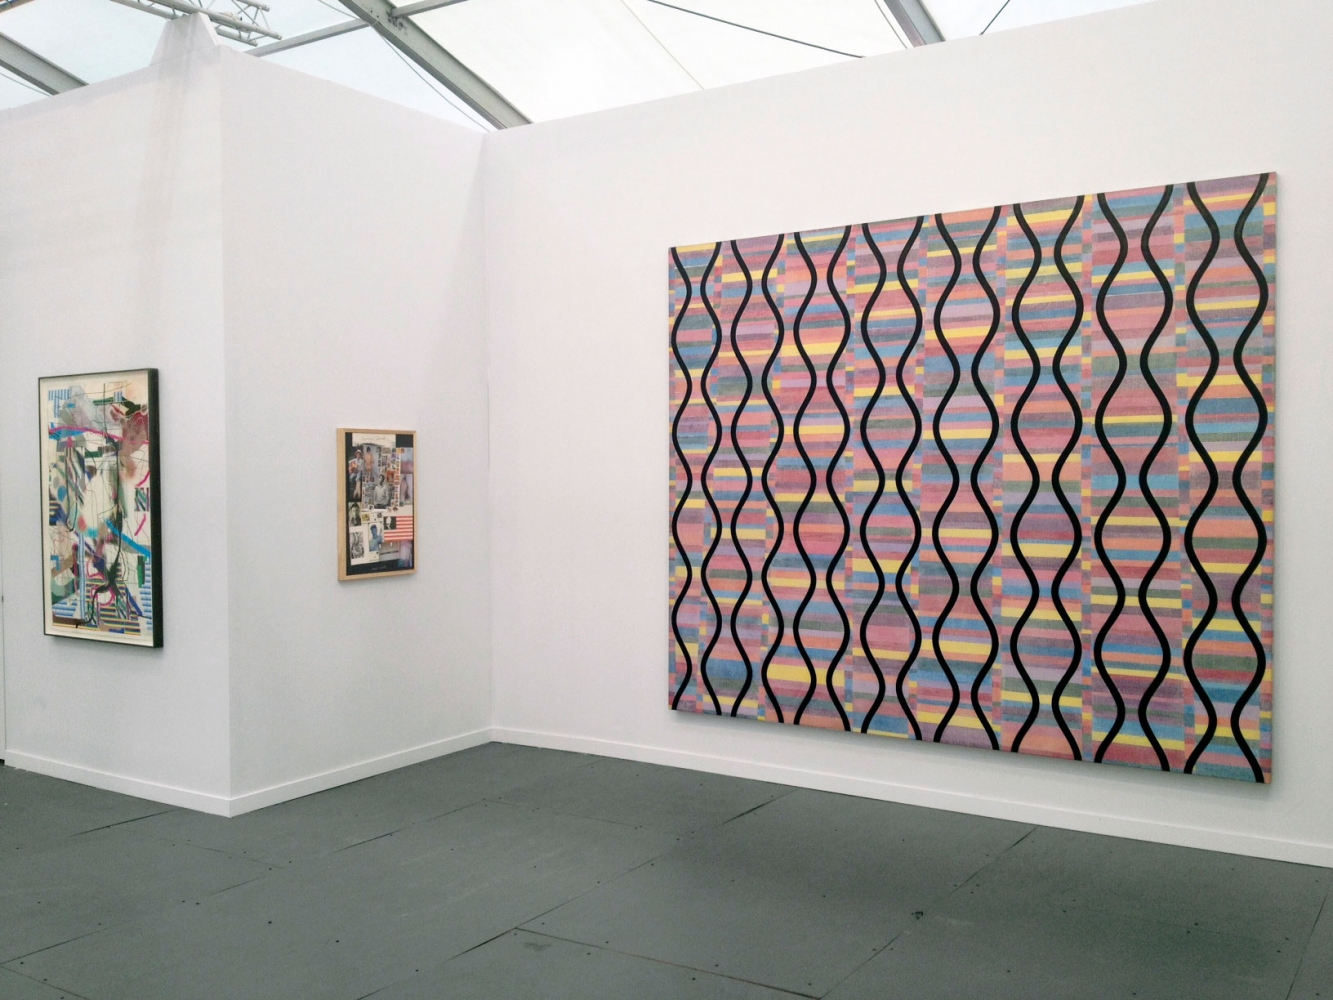 Luhring Augustine, Frieze New York